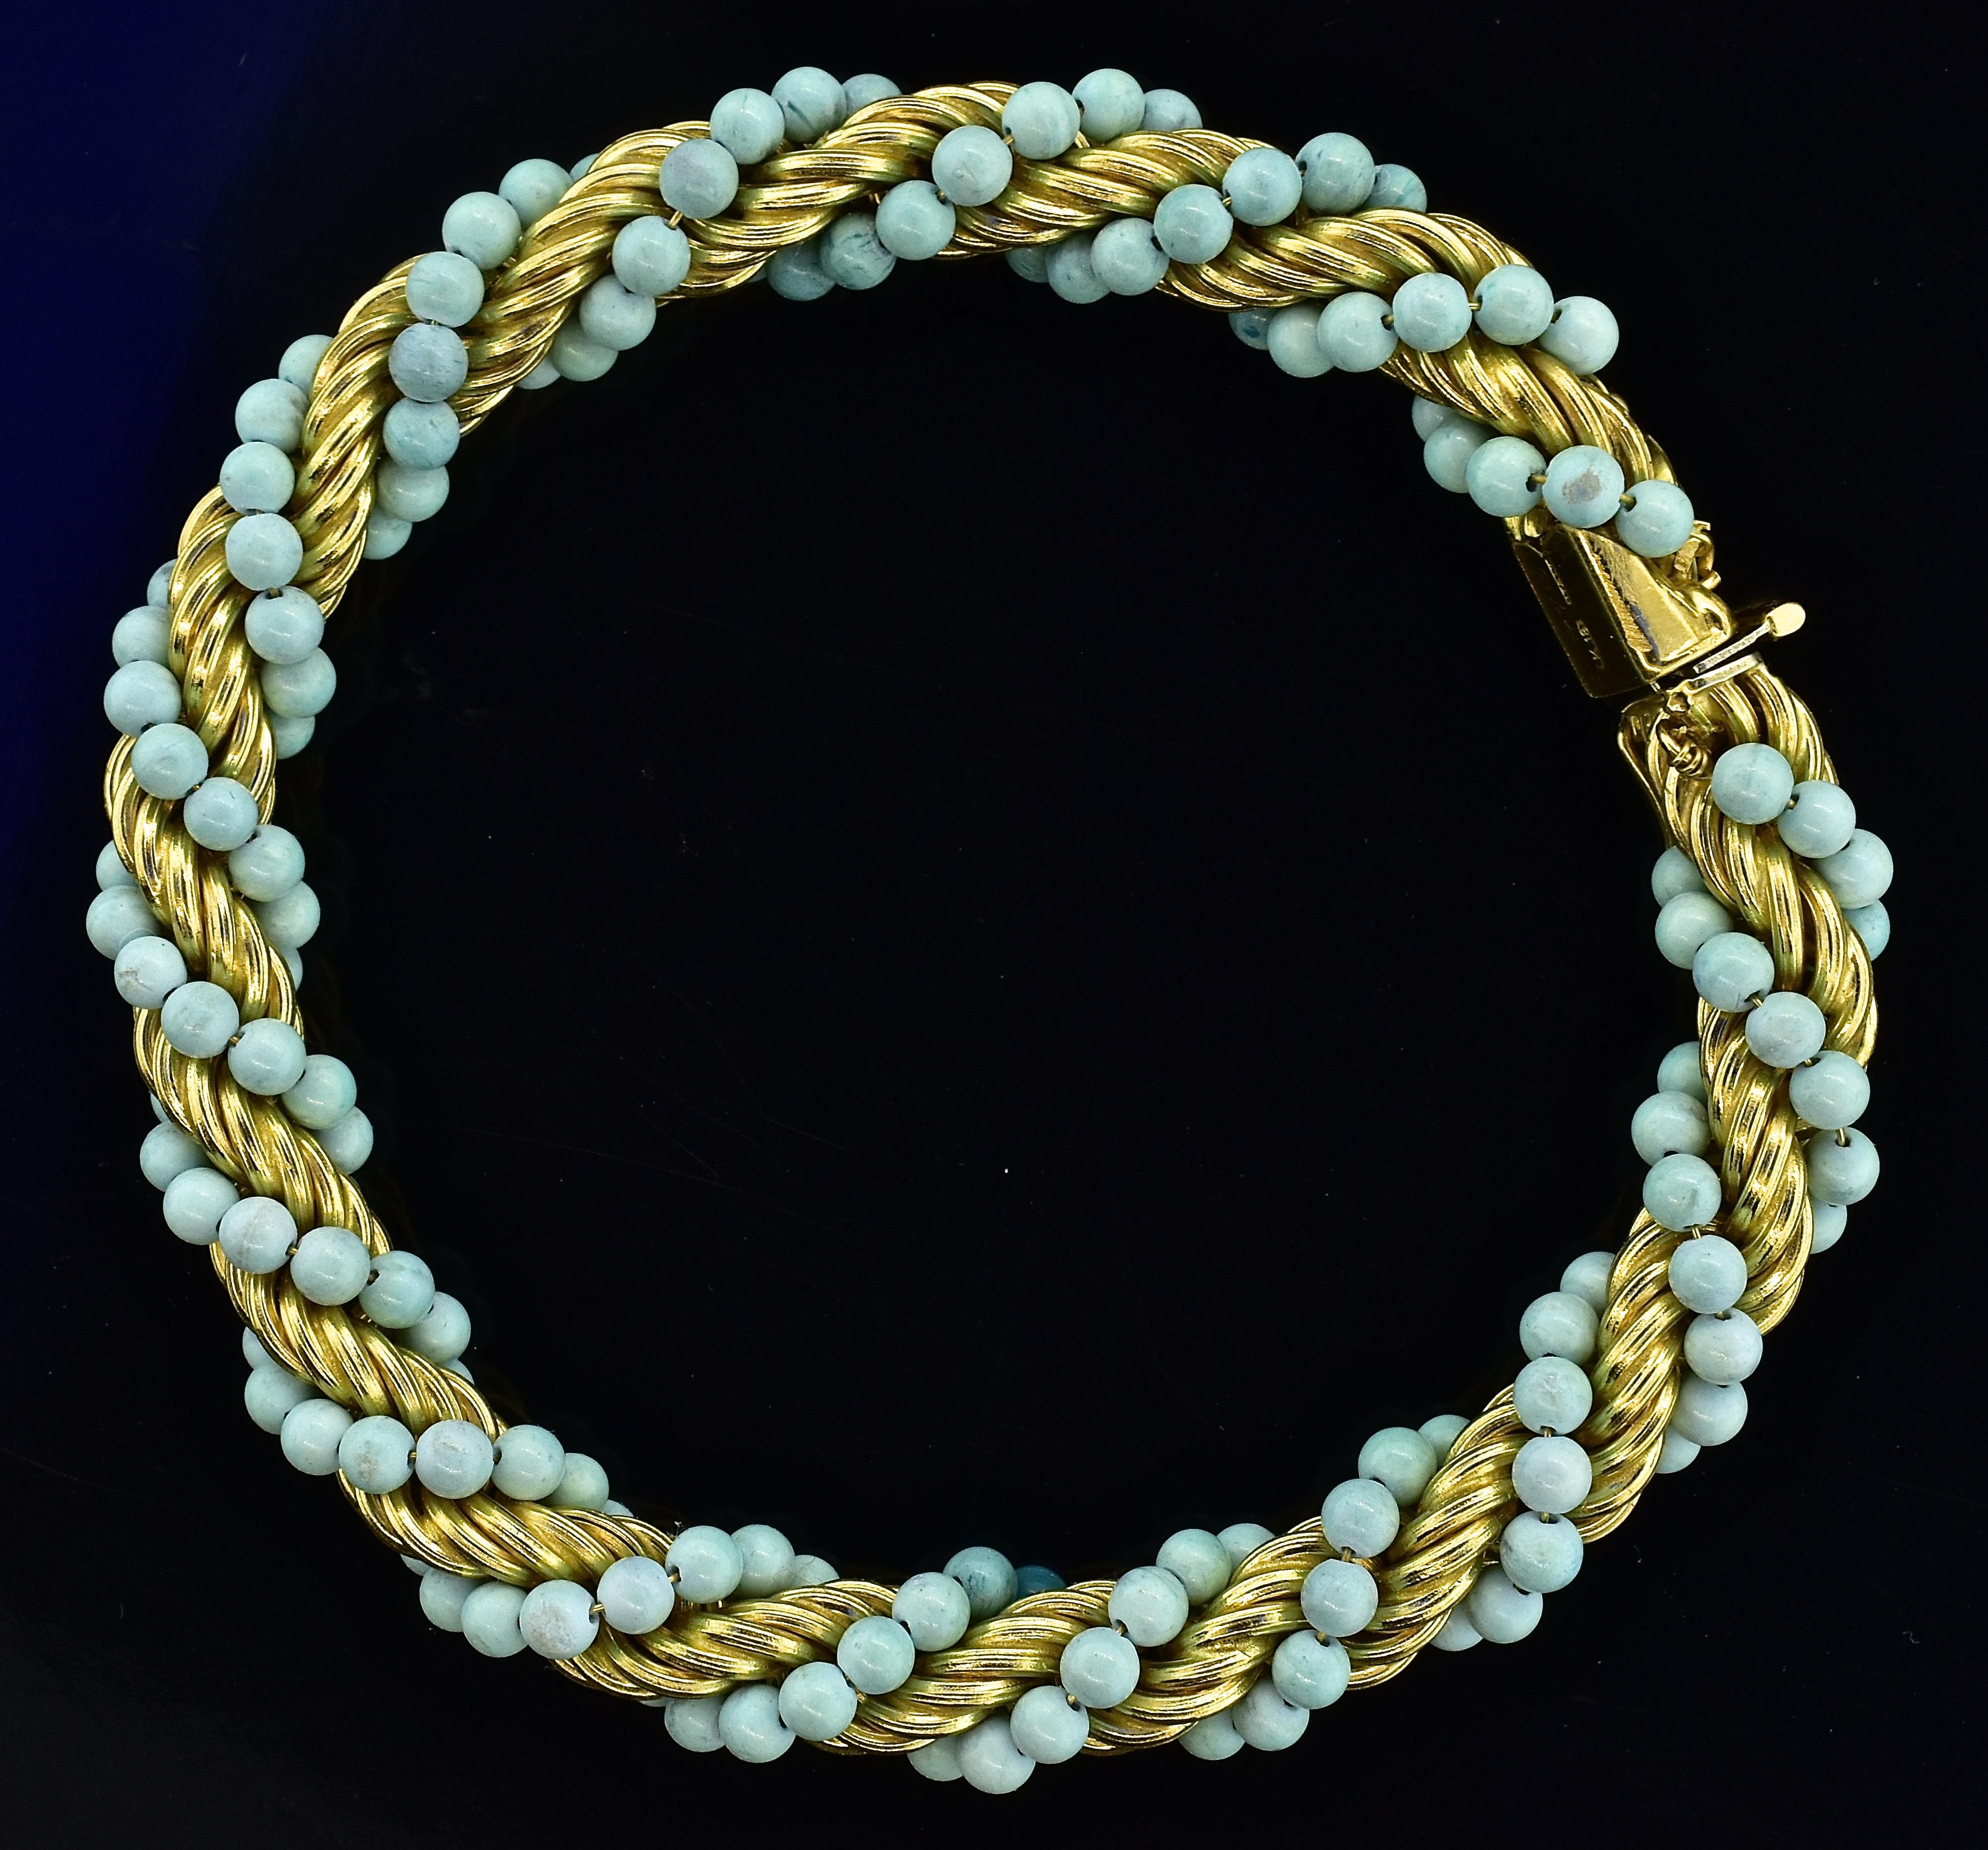 Tiffany and Co. vintage 18K gold bracelet with pastel blue-green turquoise wrapped around the rope style links.  The turquoise beads measures 1.5 to 2.0 mm., and the bracelet weighs 18.3 grams.  This type of bracelet was a popular motif by Tiffany